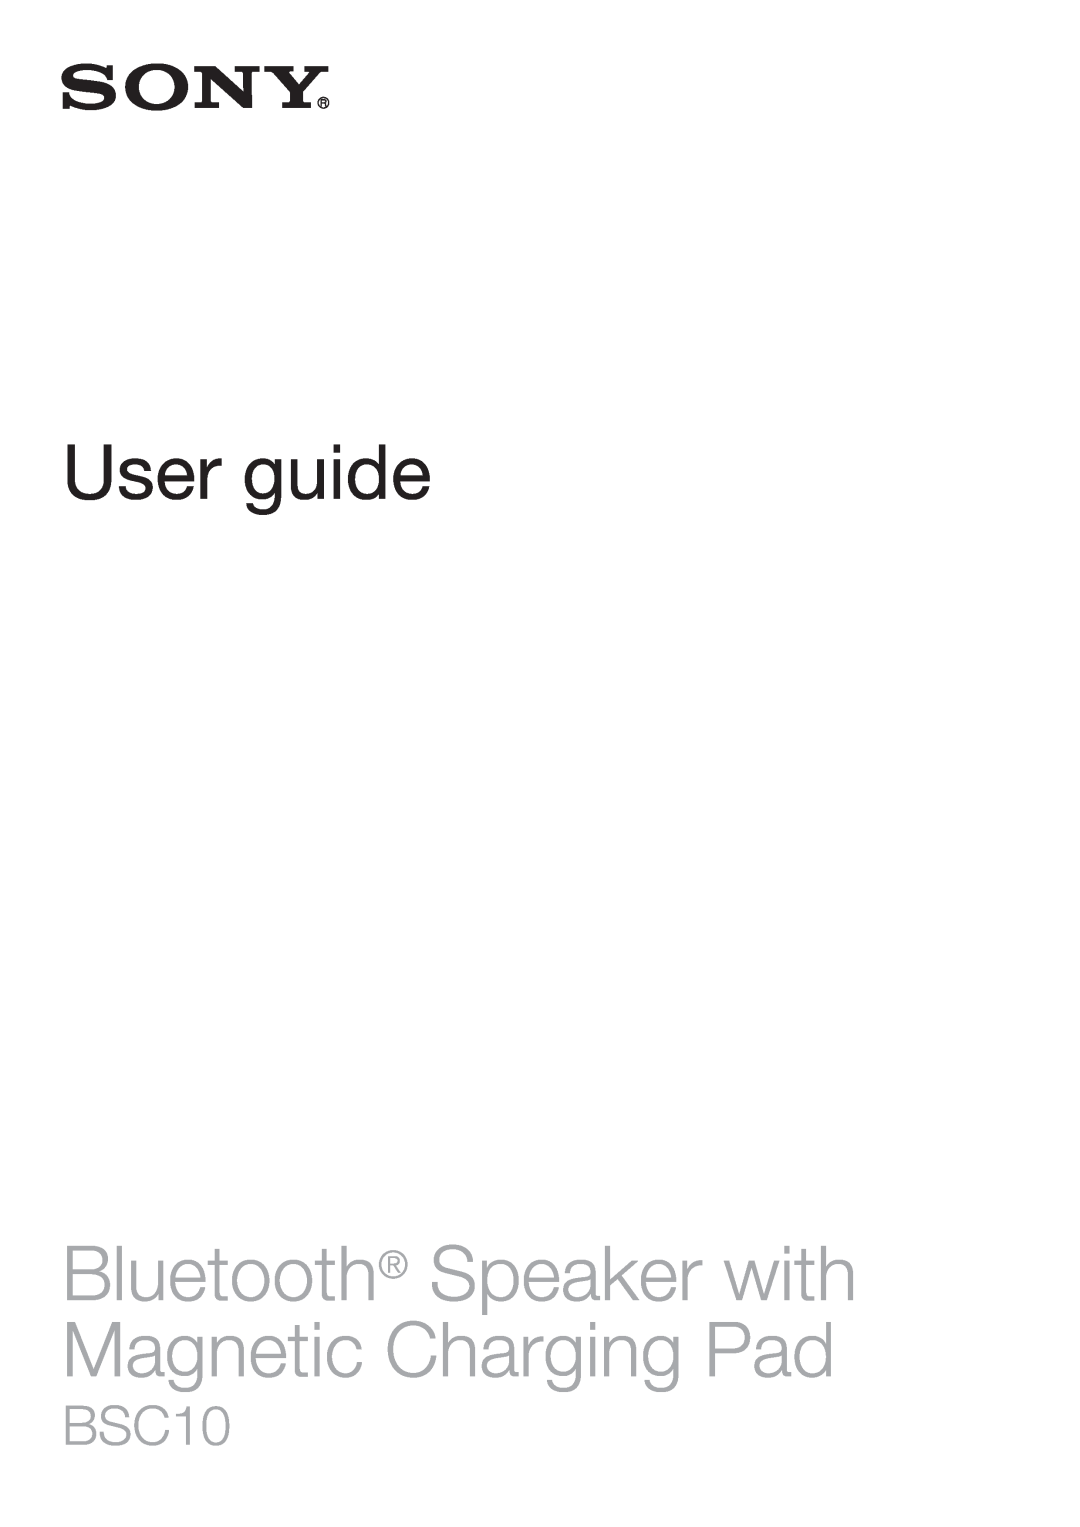 Sony BSC10 manual User guide, Bluetooth Speaker with Magnetic Charging Pad 